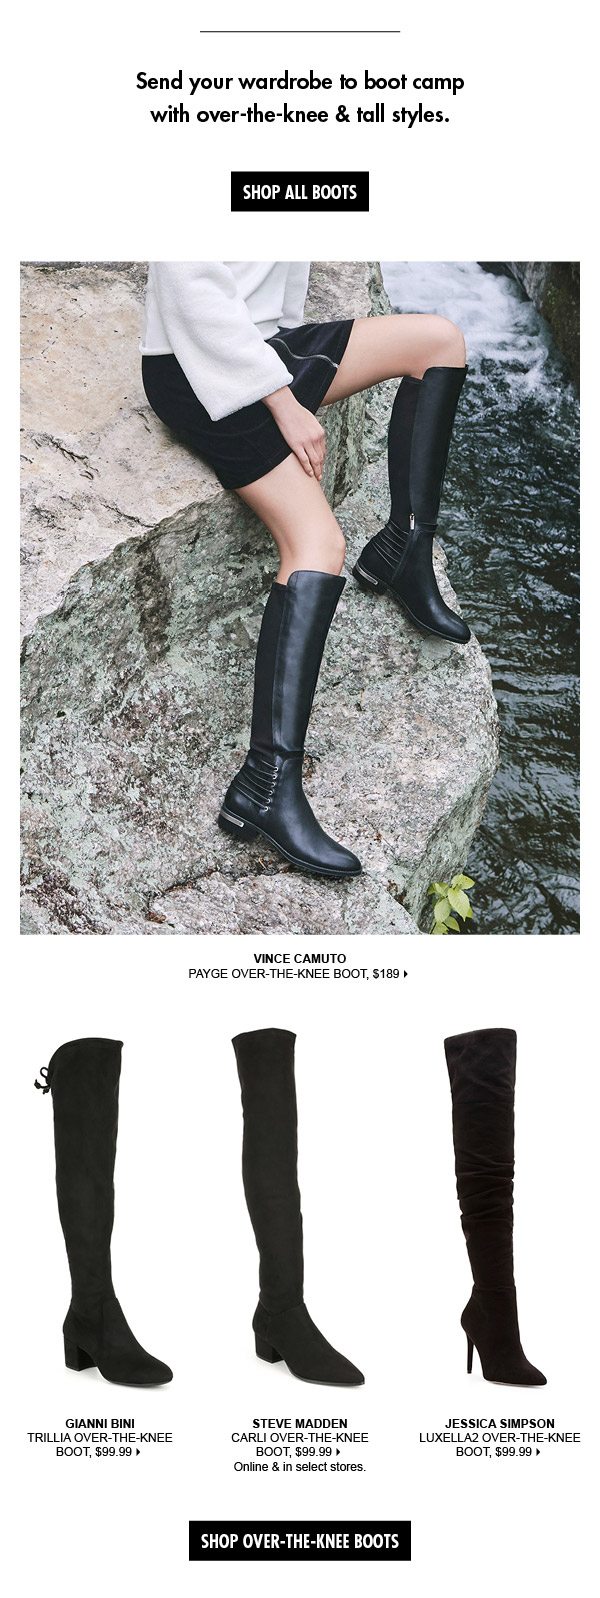 vince camuto riding boots dillards